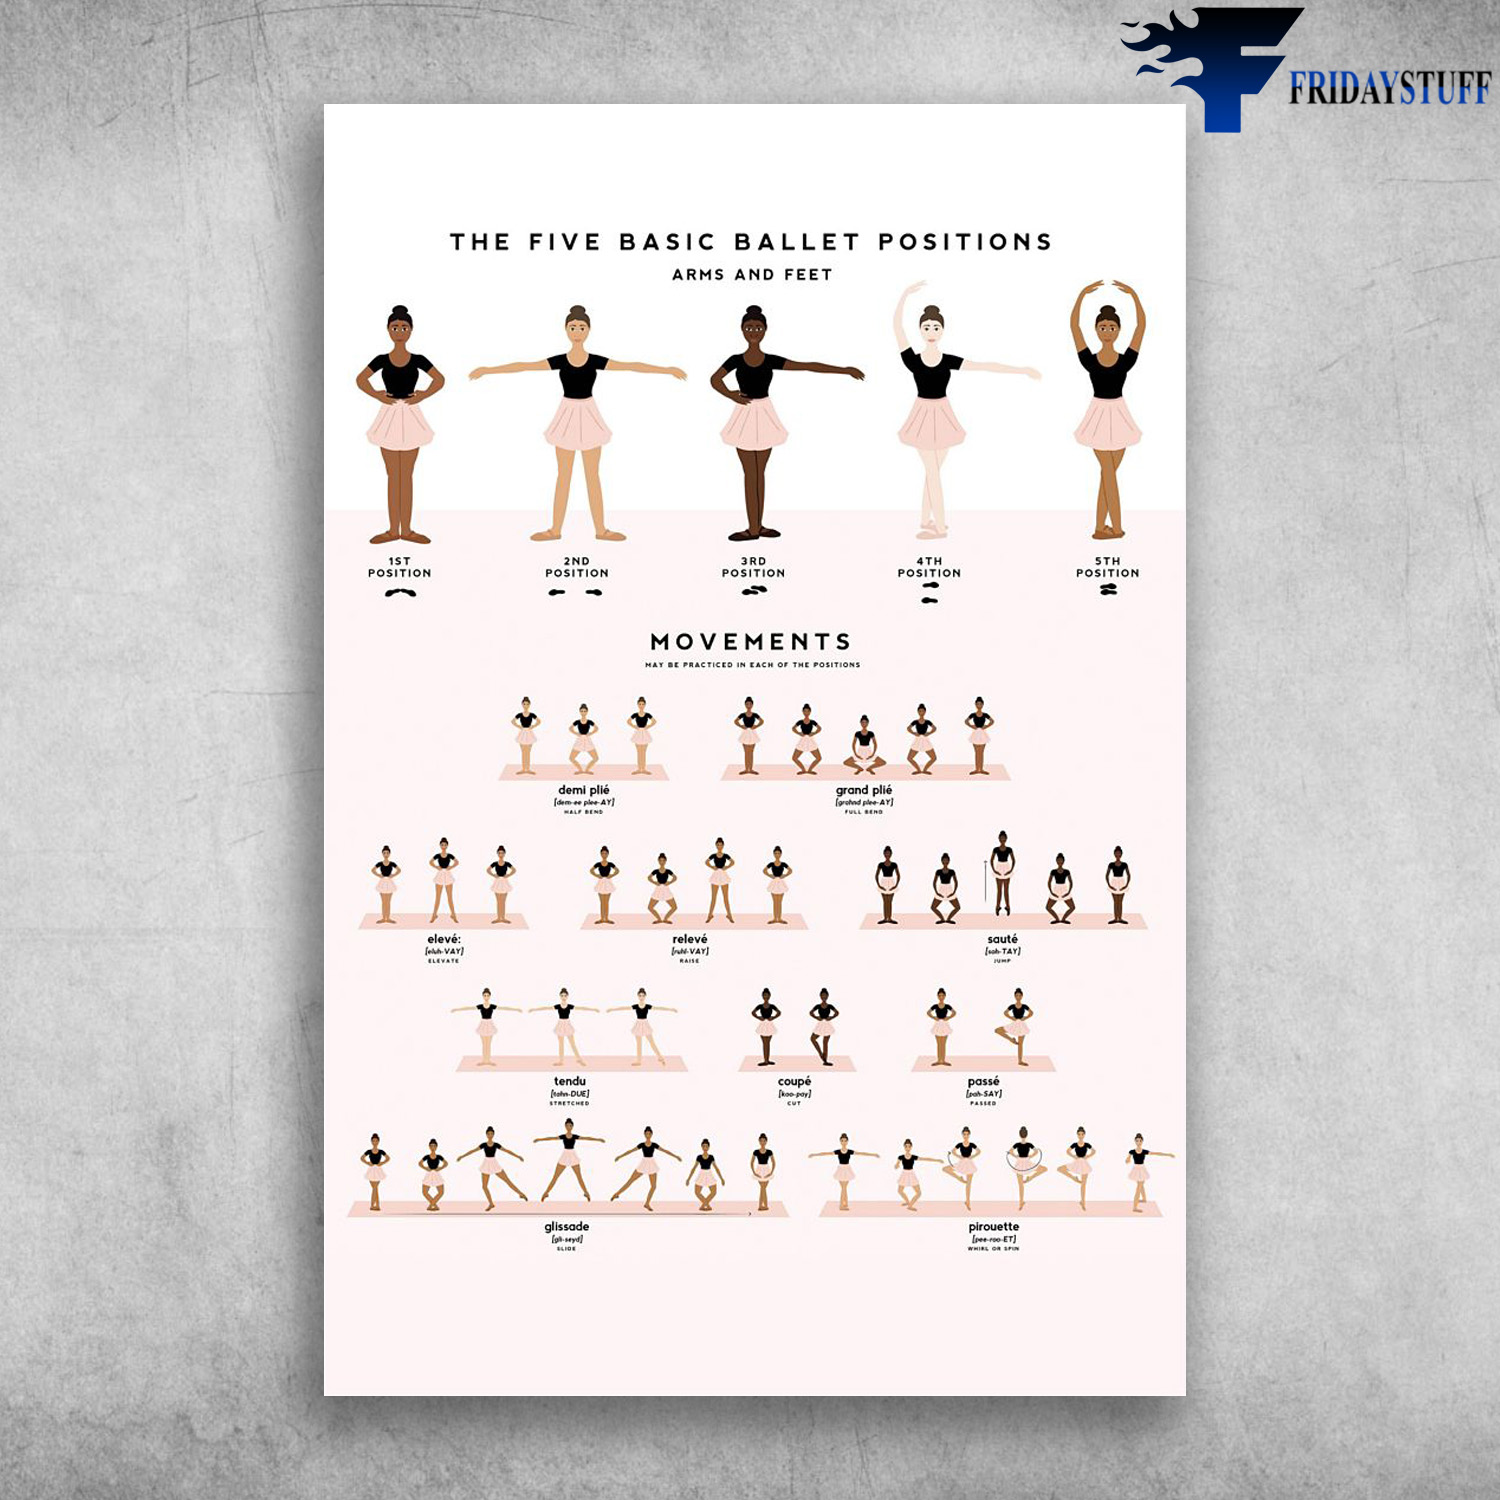 Ballet Dancer Skill - The Five Basic Ballet Positions, Arms And Feet, Movements Maybe PracticedIn Each Of The Positions